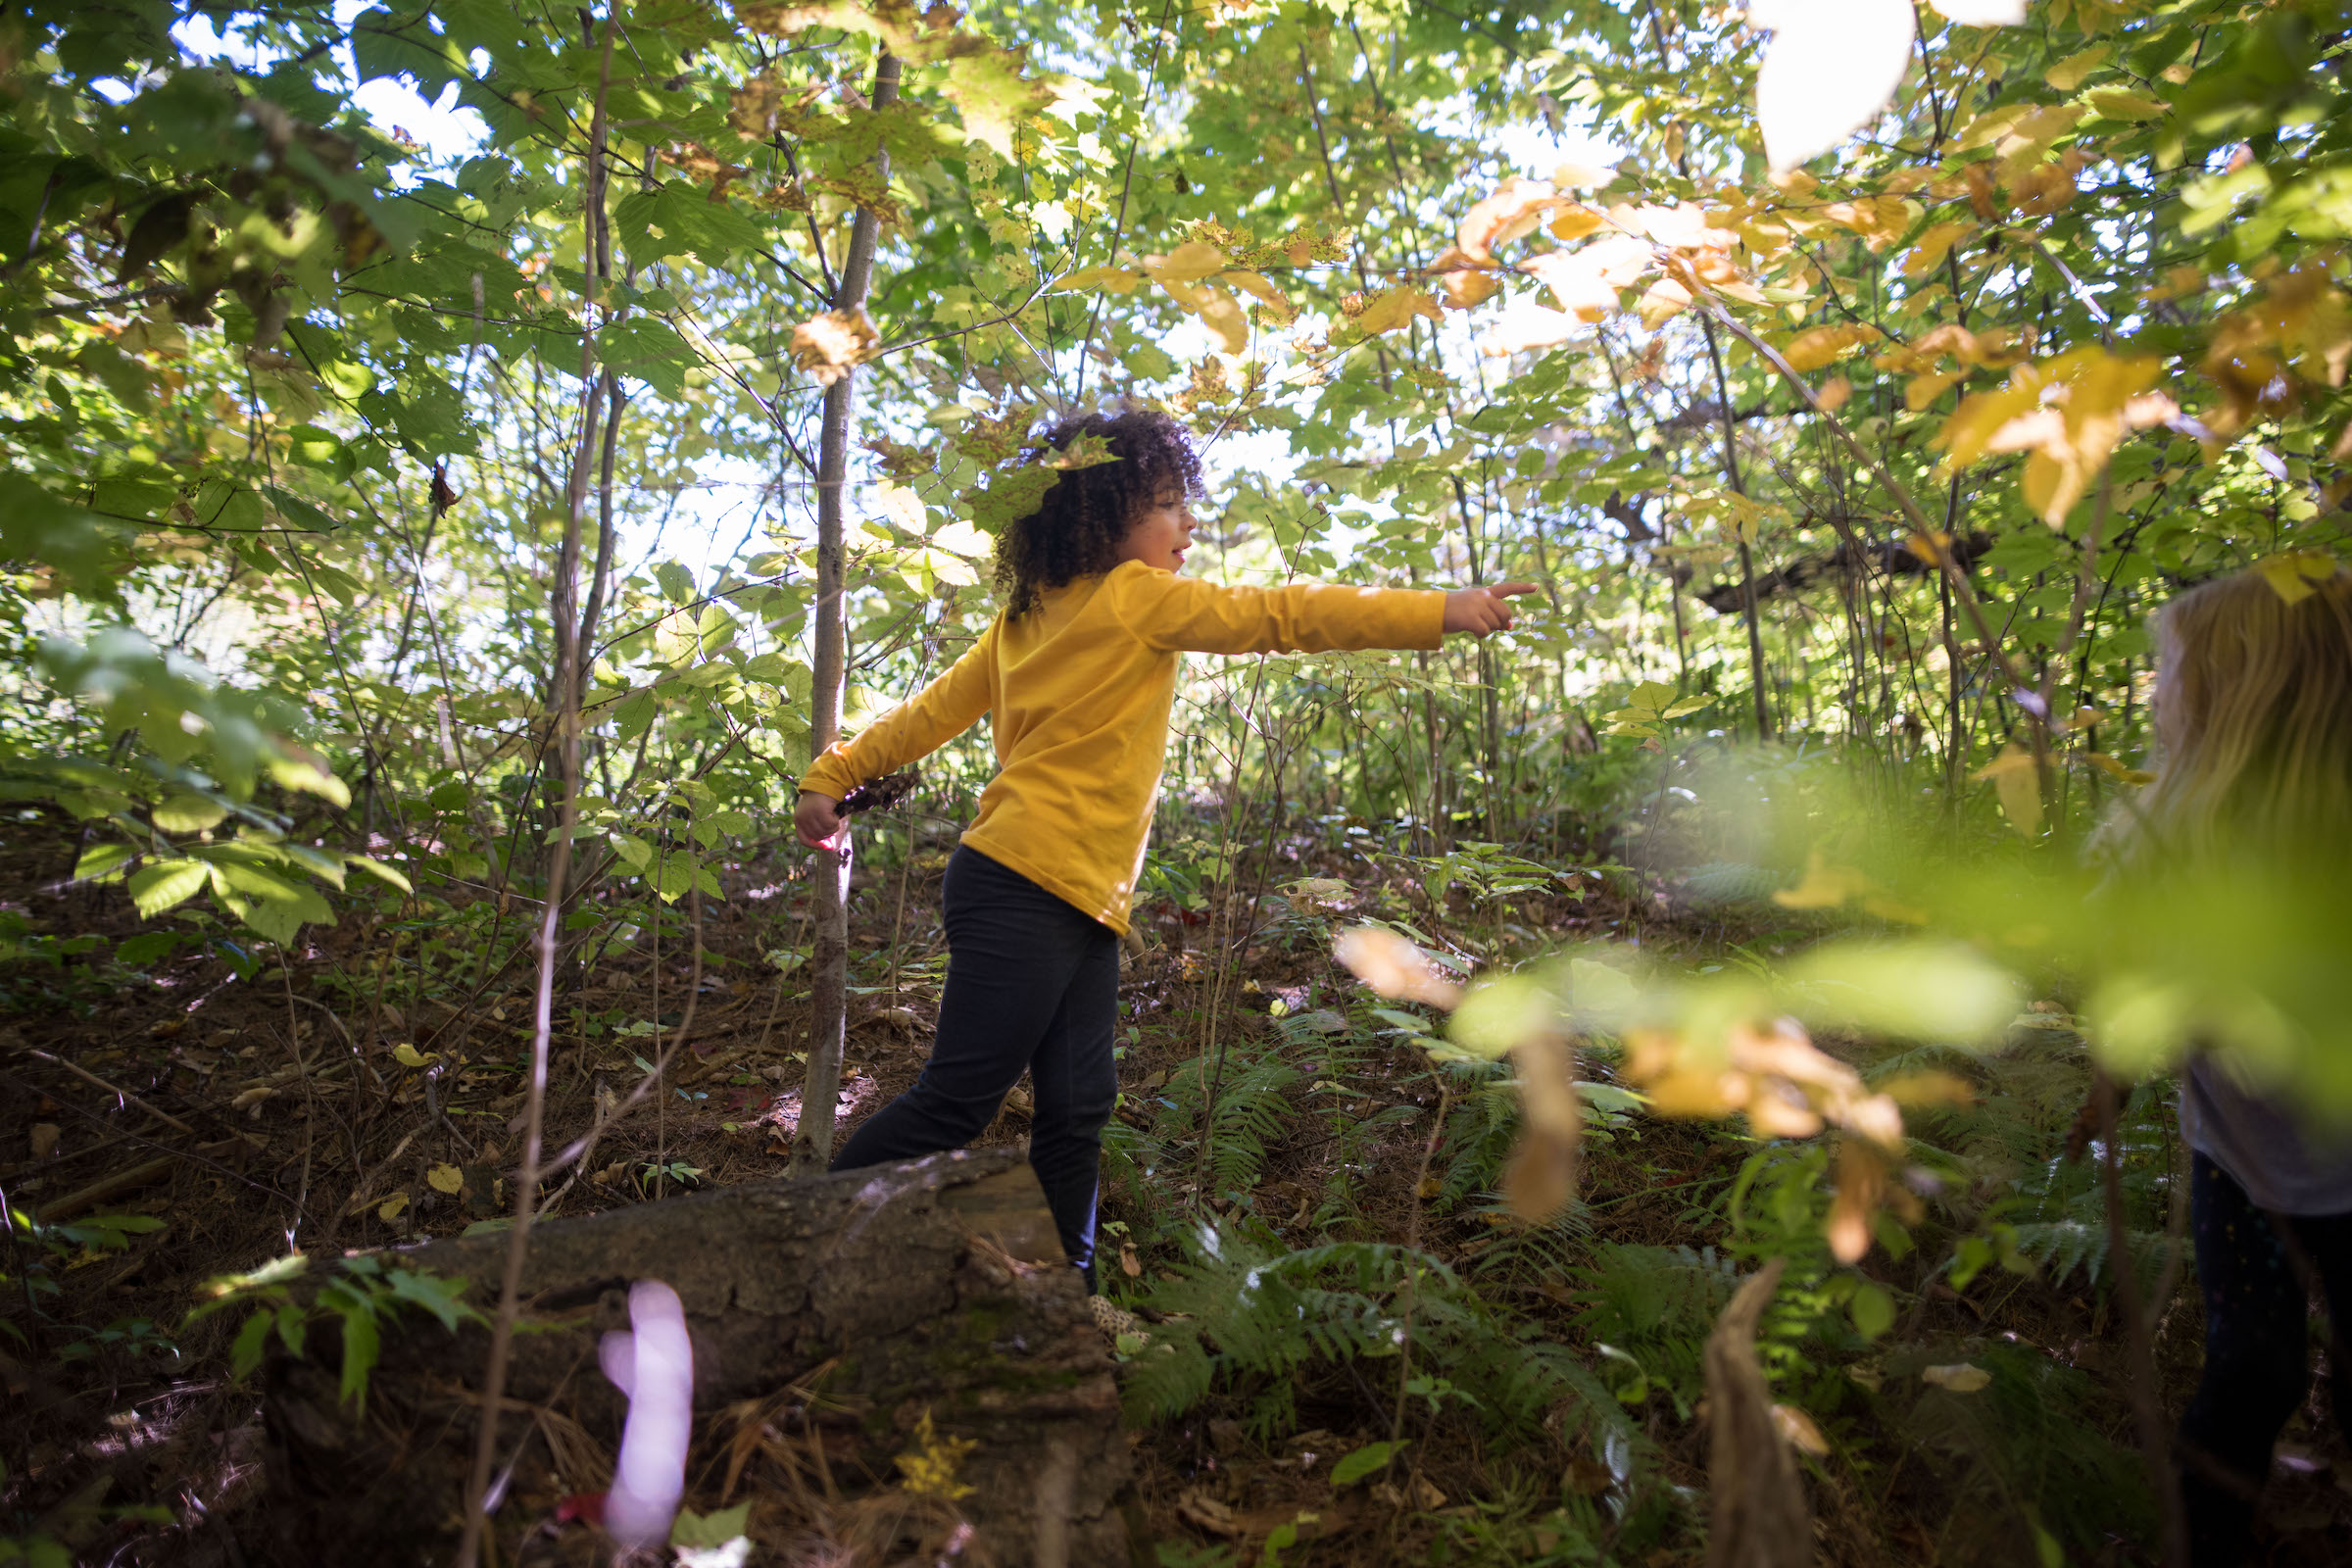 Two kids frolic through the sunny woods. (photo © Ben Conant)